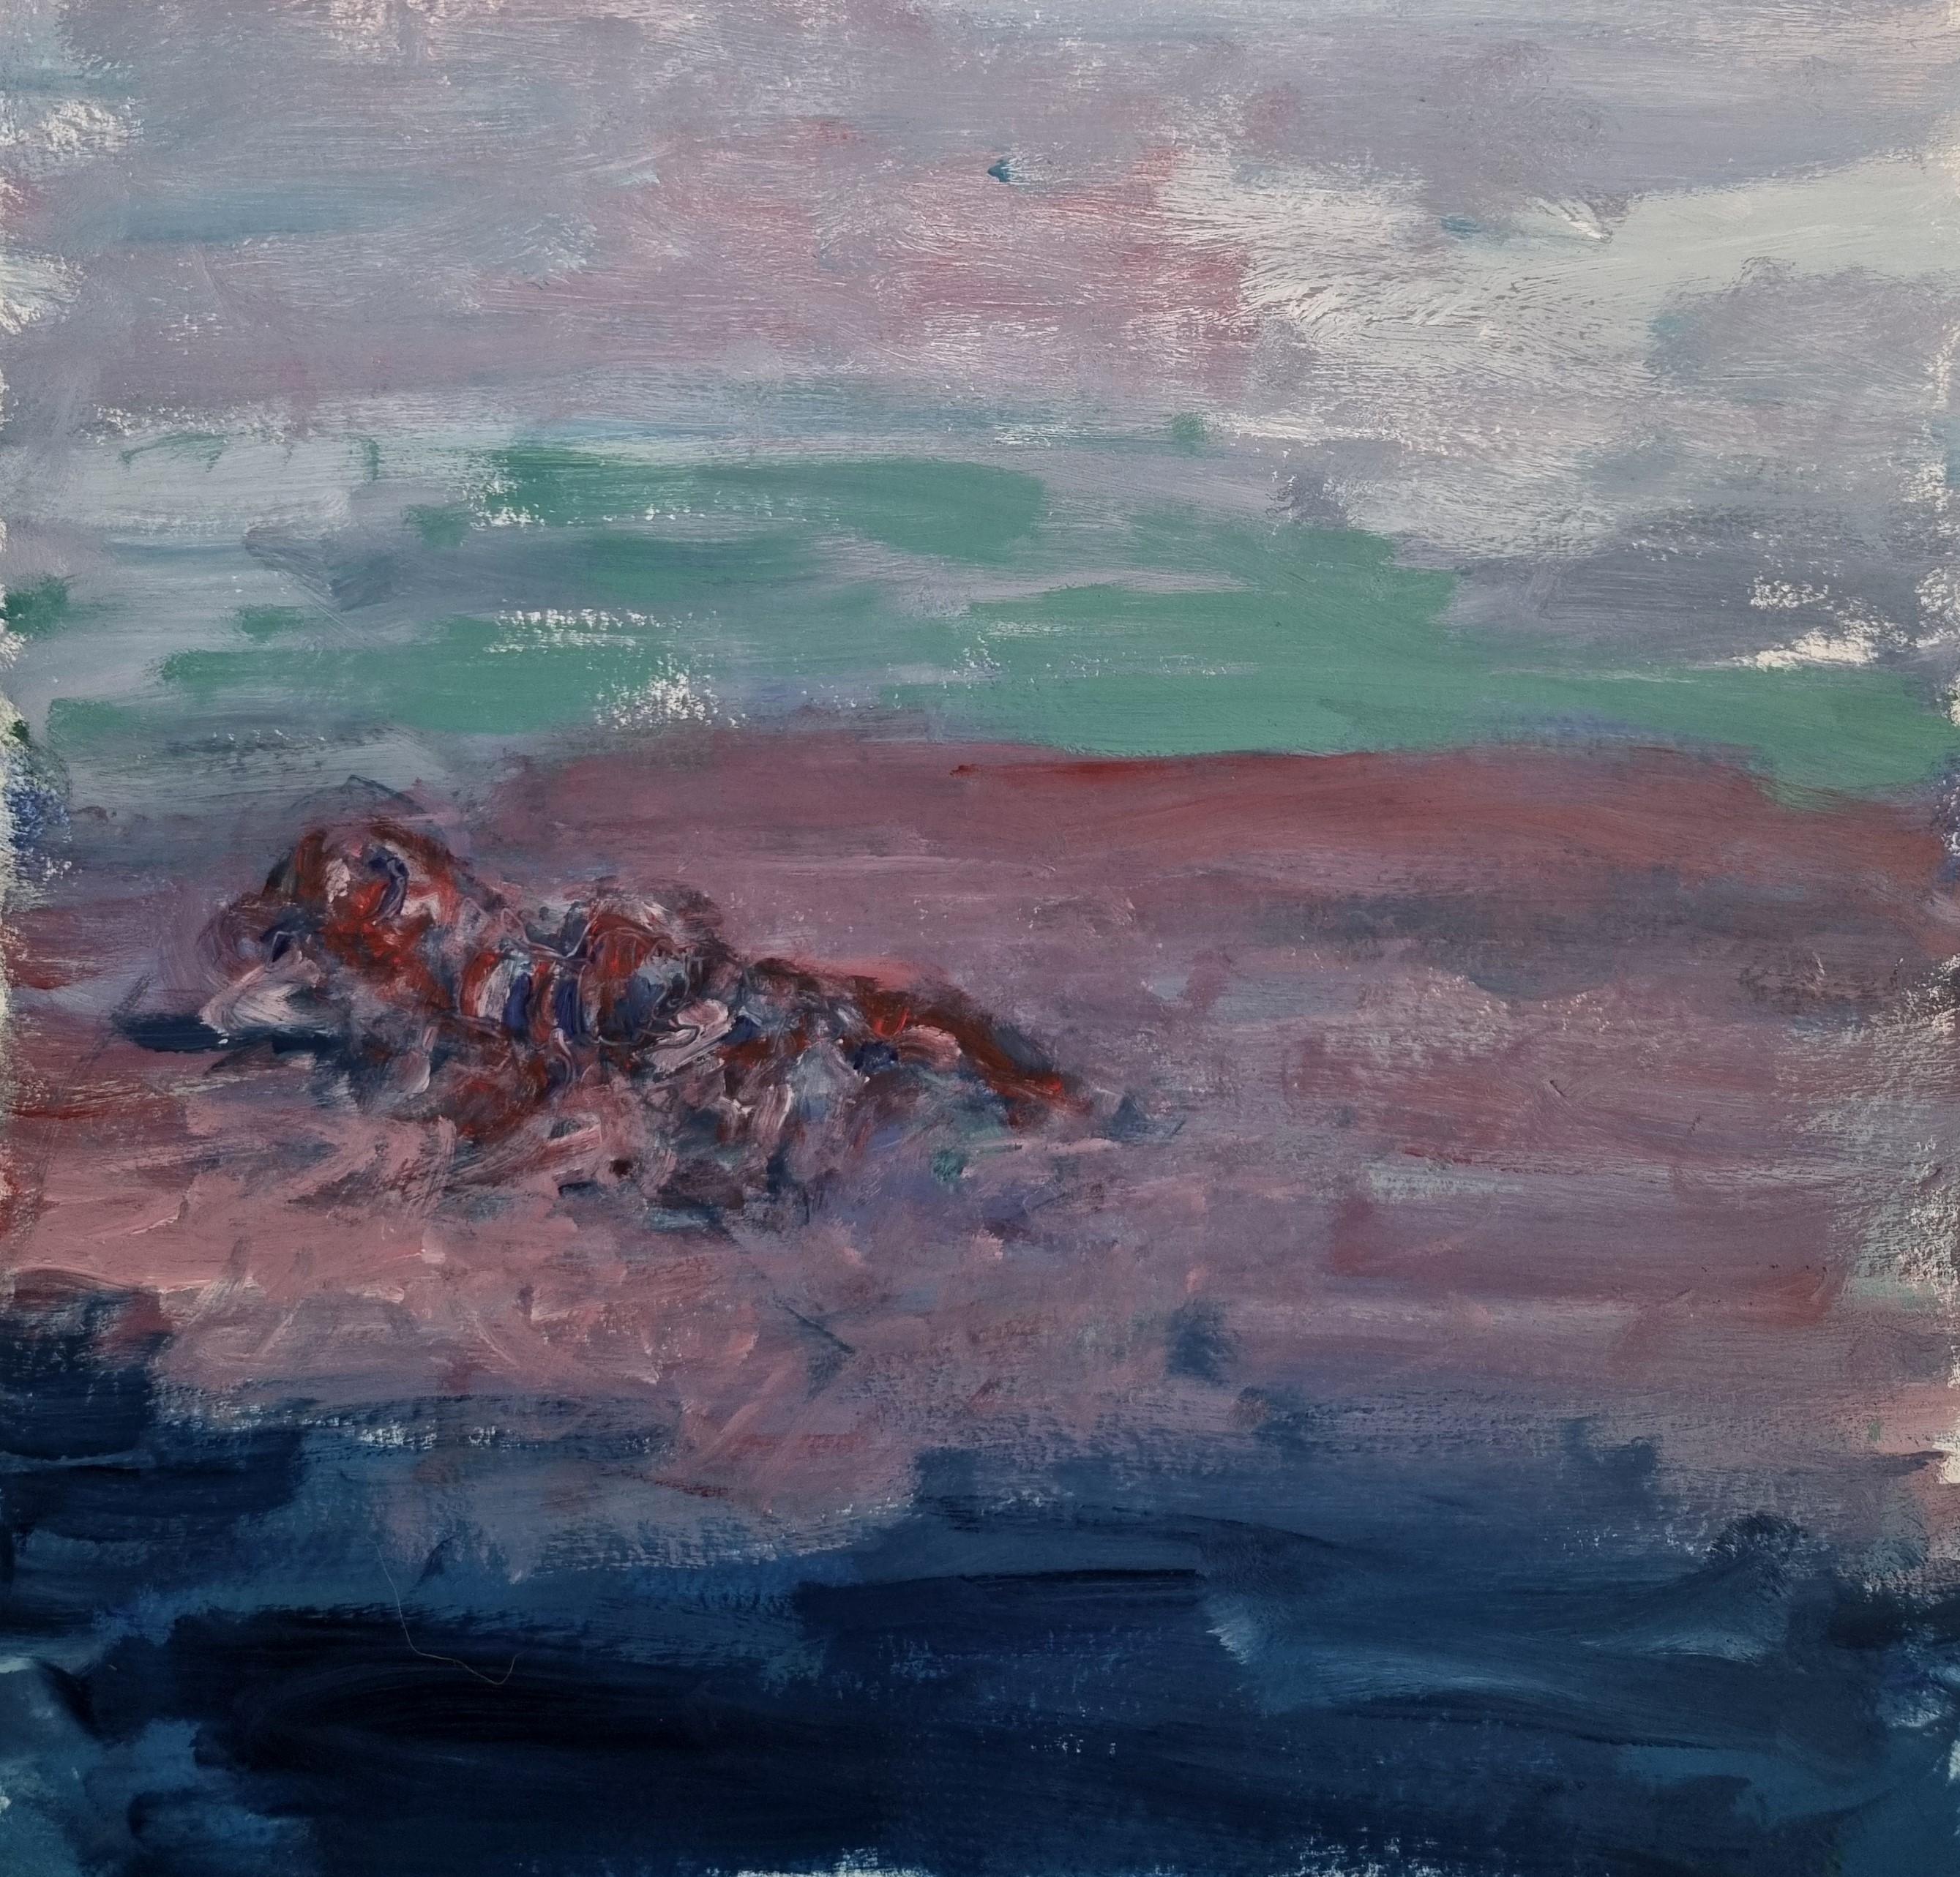 Remains (Body in the Field 2), 2022
oil on paper 
16 17/32 H x 11 13/16 W in.
42 H x 30 W cm

Signed on reverse

Zsolt Berszán embodies in his works the dissolution of the human body through the prism of the fragment, the body in pieces, and the